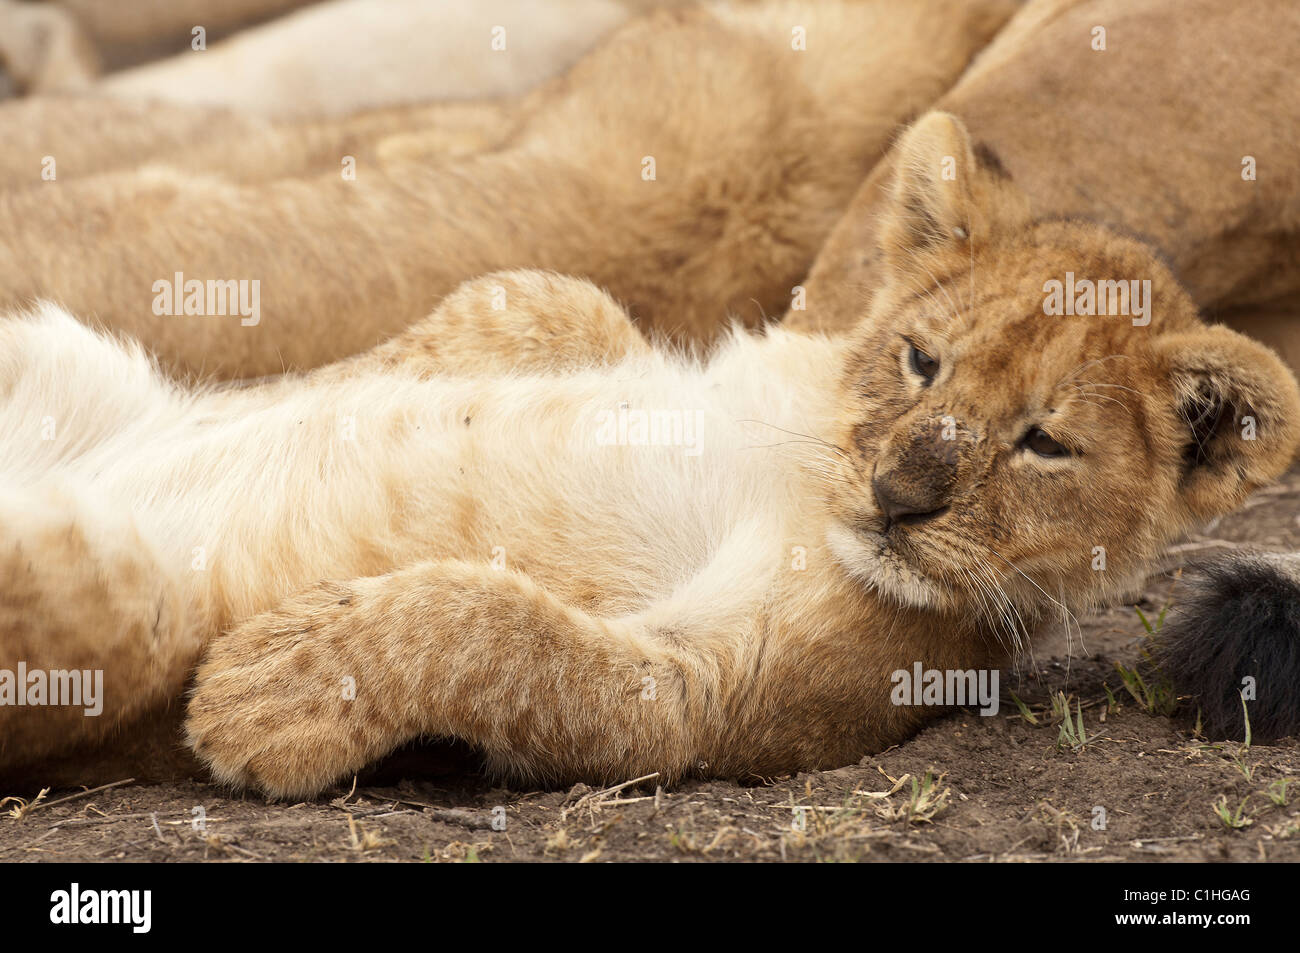 Stock photo of a lion cub in complete relaxation. Stock Photo